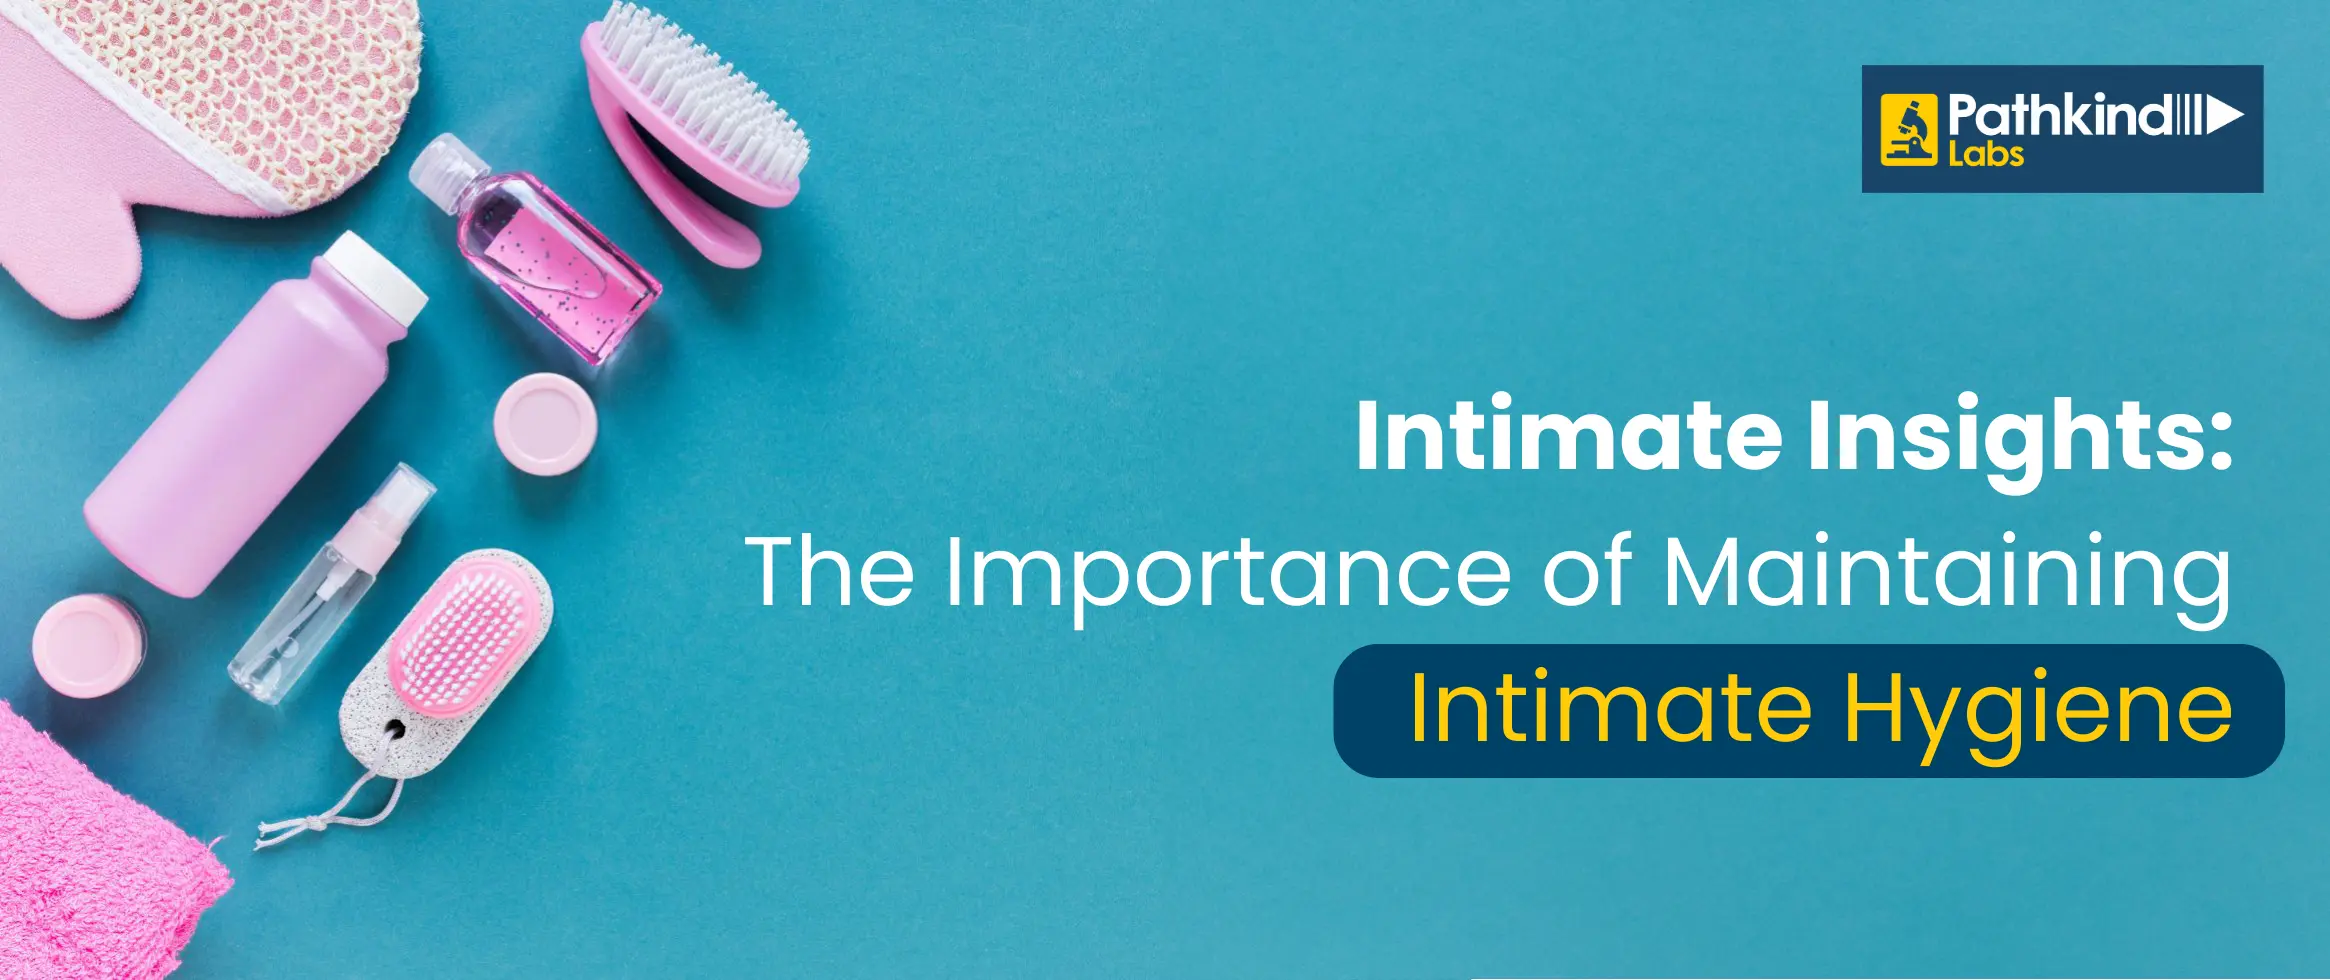  Intimate Insights: The Importance of Maintaining Intimate Hygiene